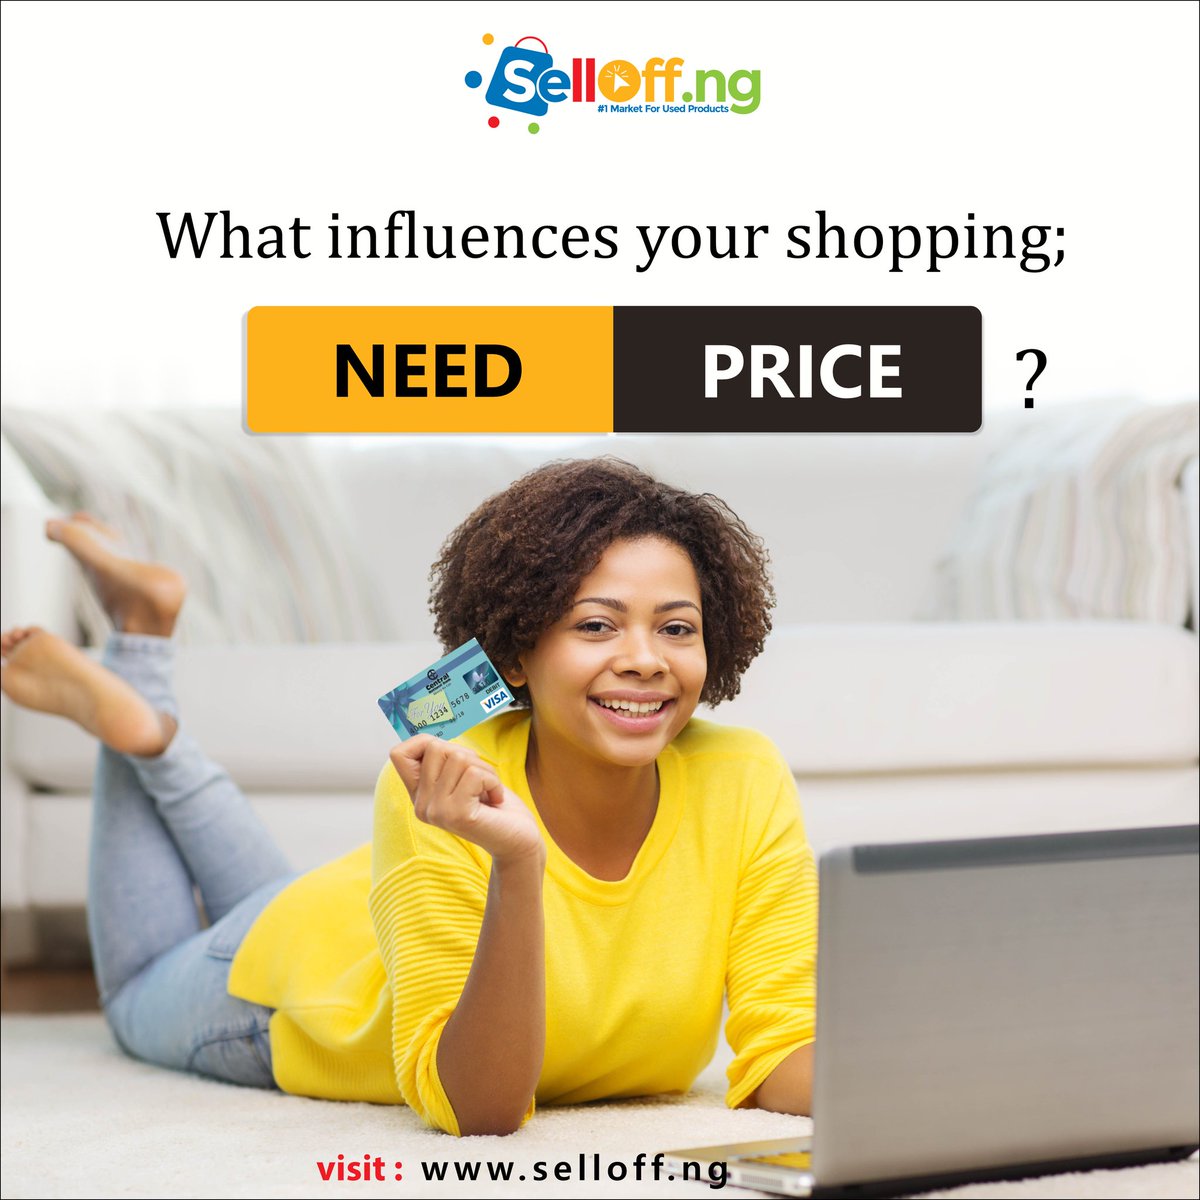 What would you say influences your #shopping? Is it the price of the product or your need for the product?
#onlineshopping #shoppingonline #FridayThoughts #shoppershour #Nigeria